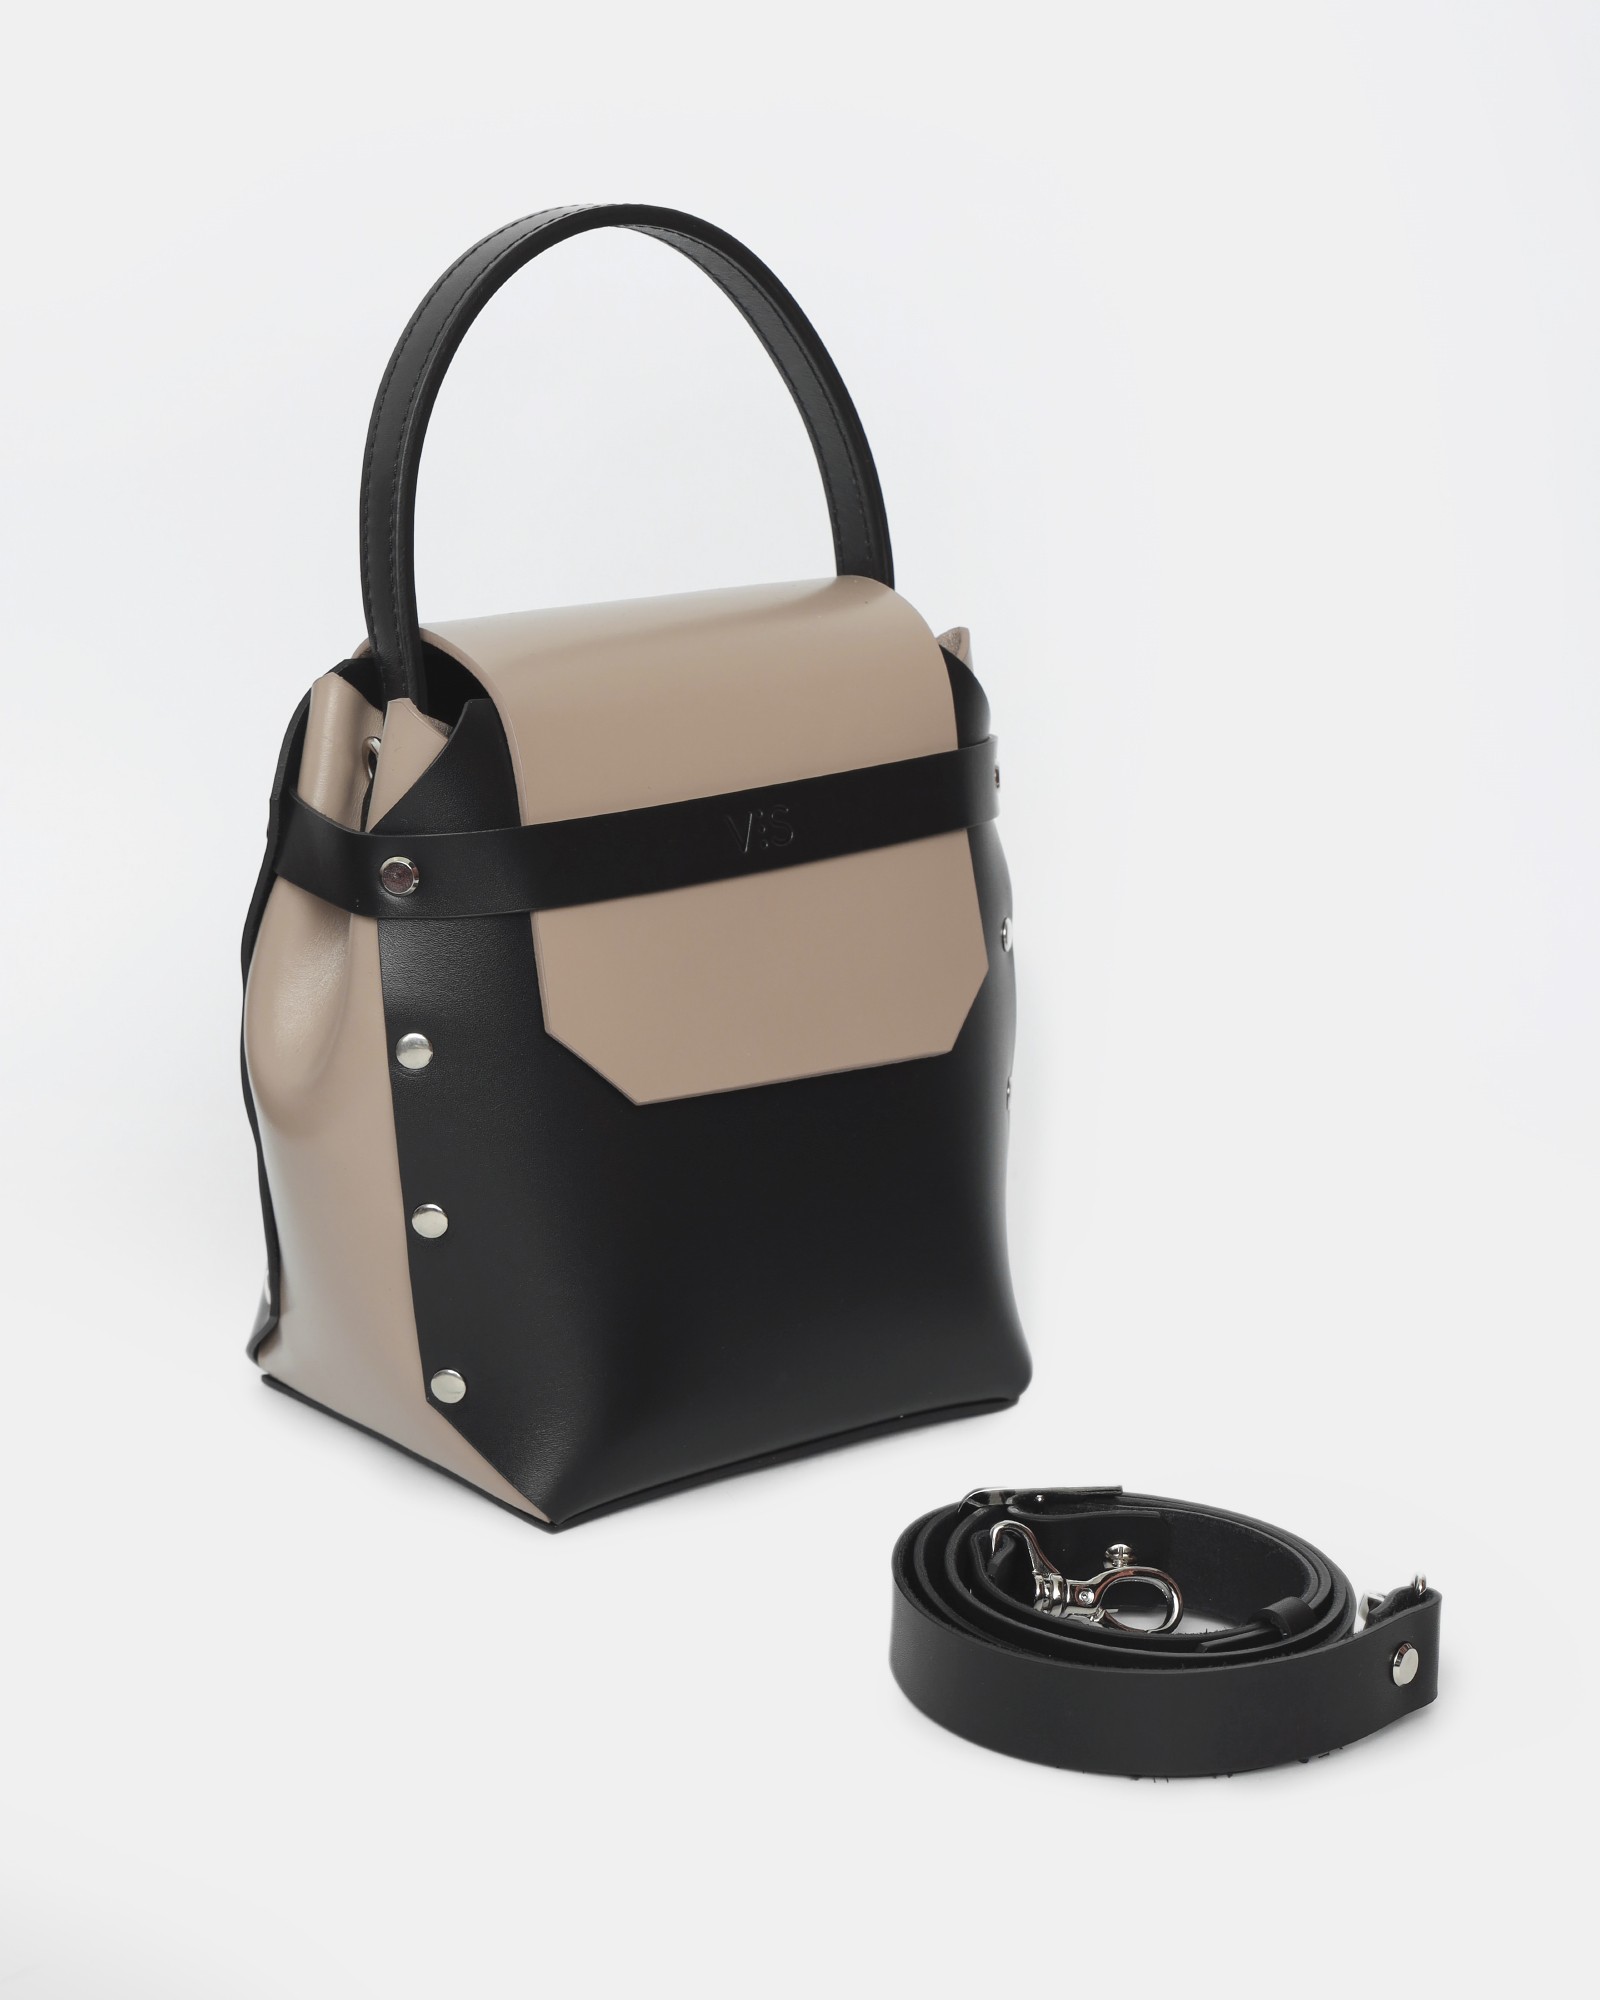 Adhara Leather Bag in black and beige color